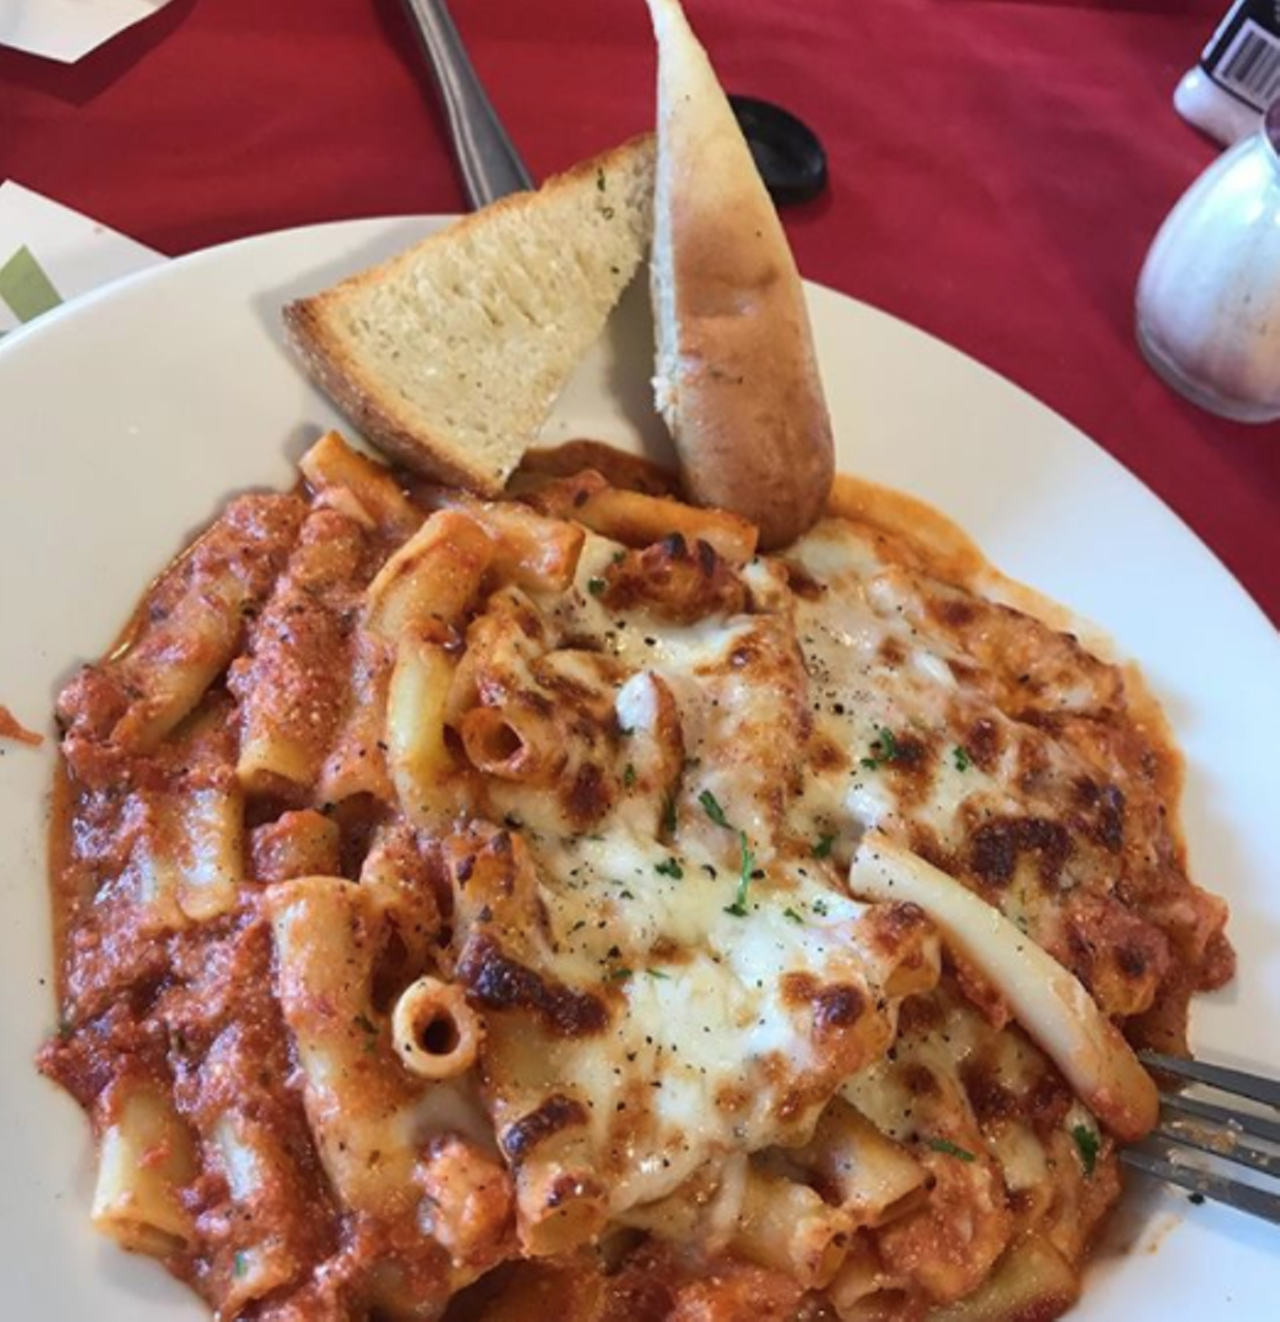 La Sorrentina
3330 Culebra Road, (210) 549-0889
You’ve probably passed this spot without a glance, but trust us – you’ll want to stop by. It’s a tight squeeze but totally worth it. Stop by Italian fare so fresh and tasty you’ll think it’s homemade. Order the penne alla vodka and prepare to be amazed.
Photo via Instagram / romannjames